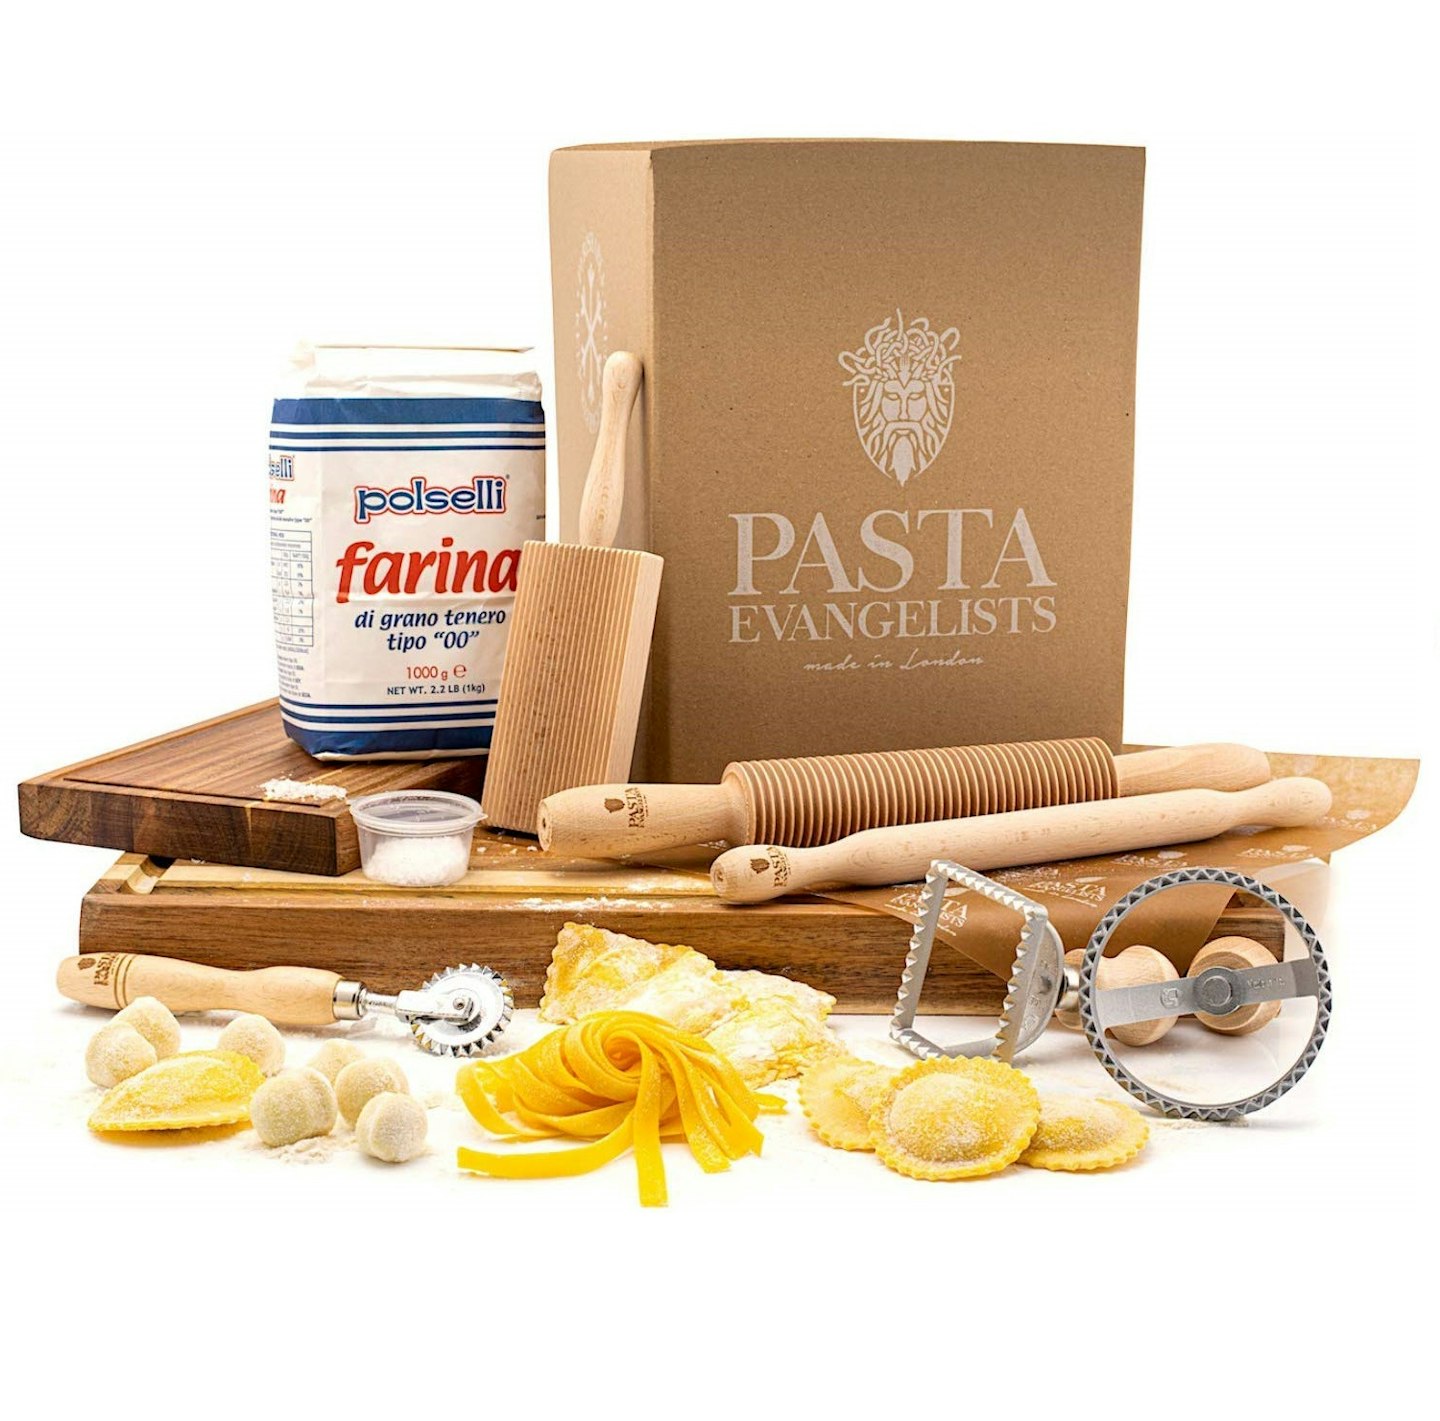 Here's everything you need to make fresh pasta at home, Wellbeing